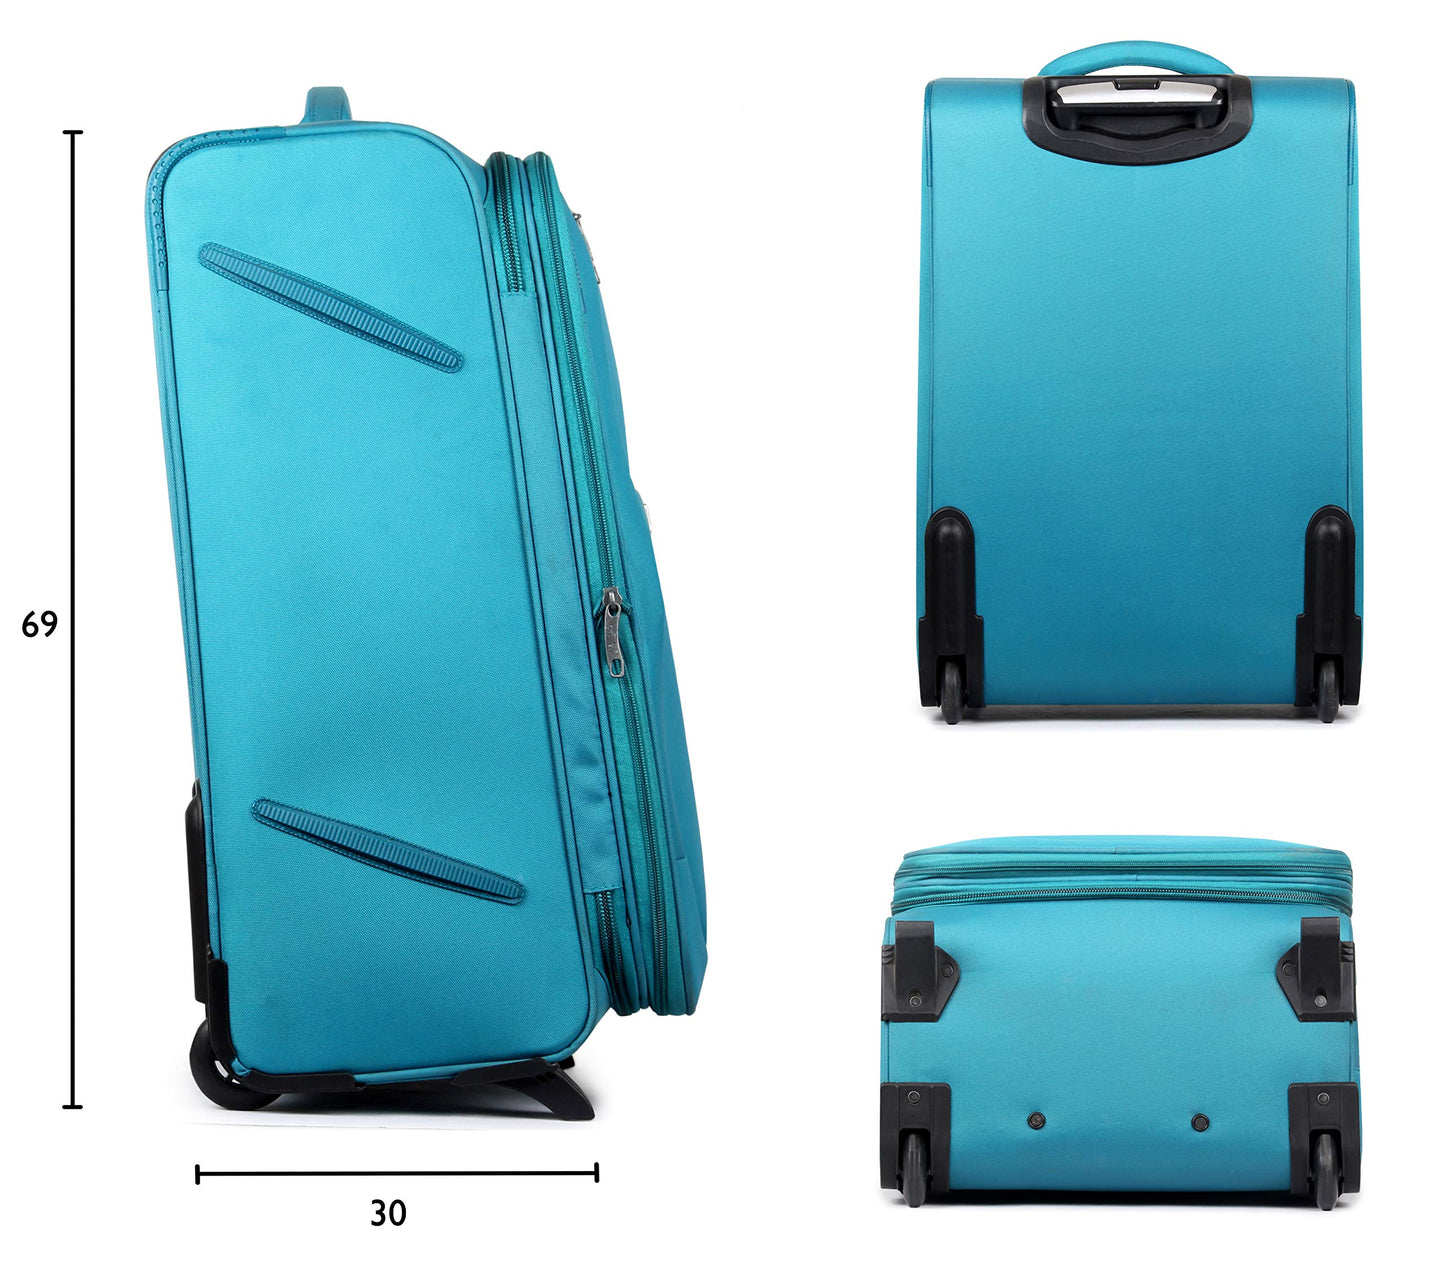 THE CLOWNFISH Tourer Series Polyester 28 Inch Turquoise Softsided Suitcase Luggage Trolley Bag